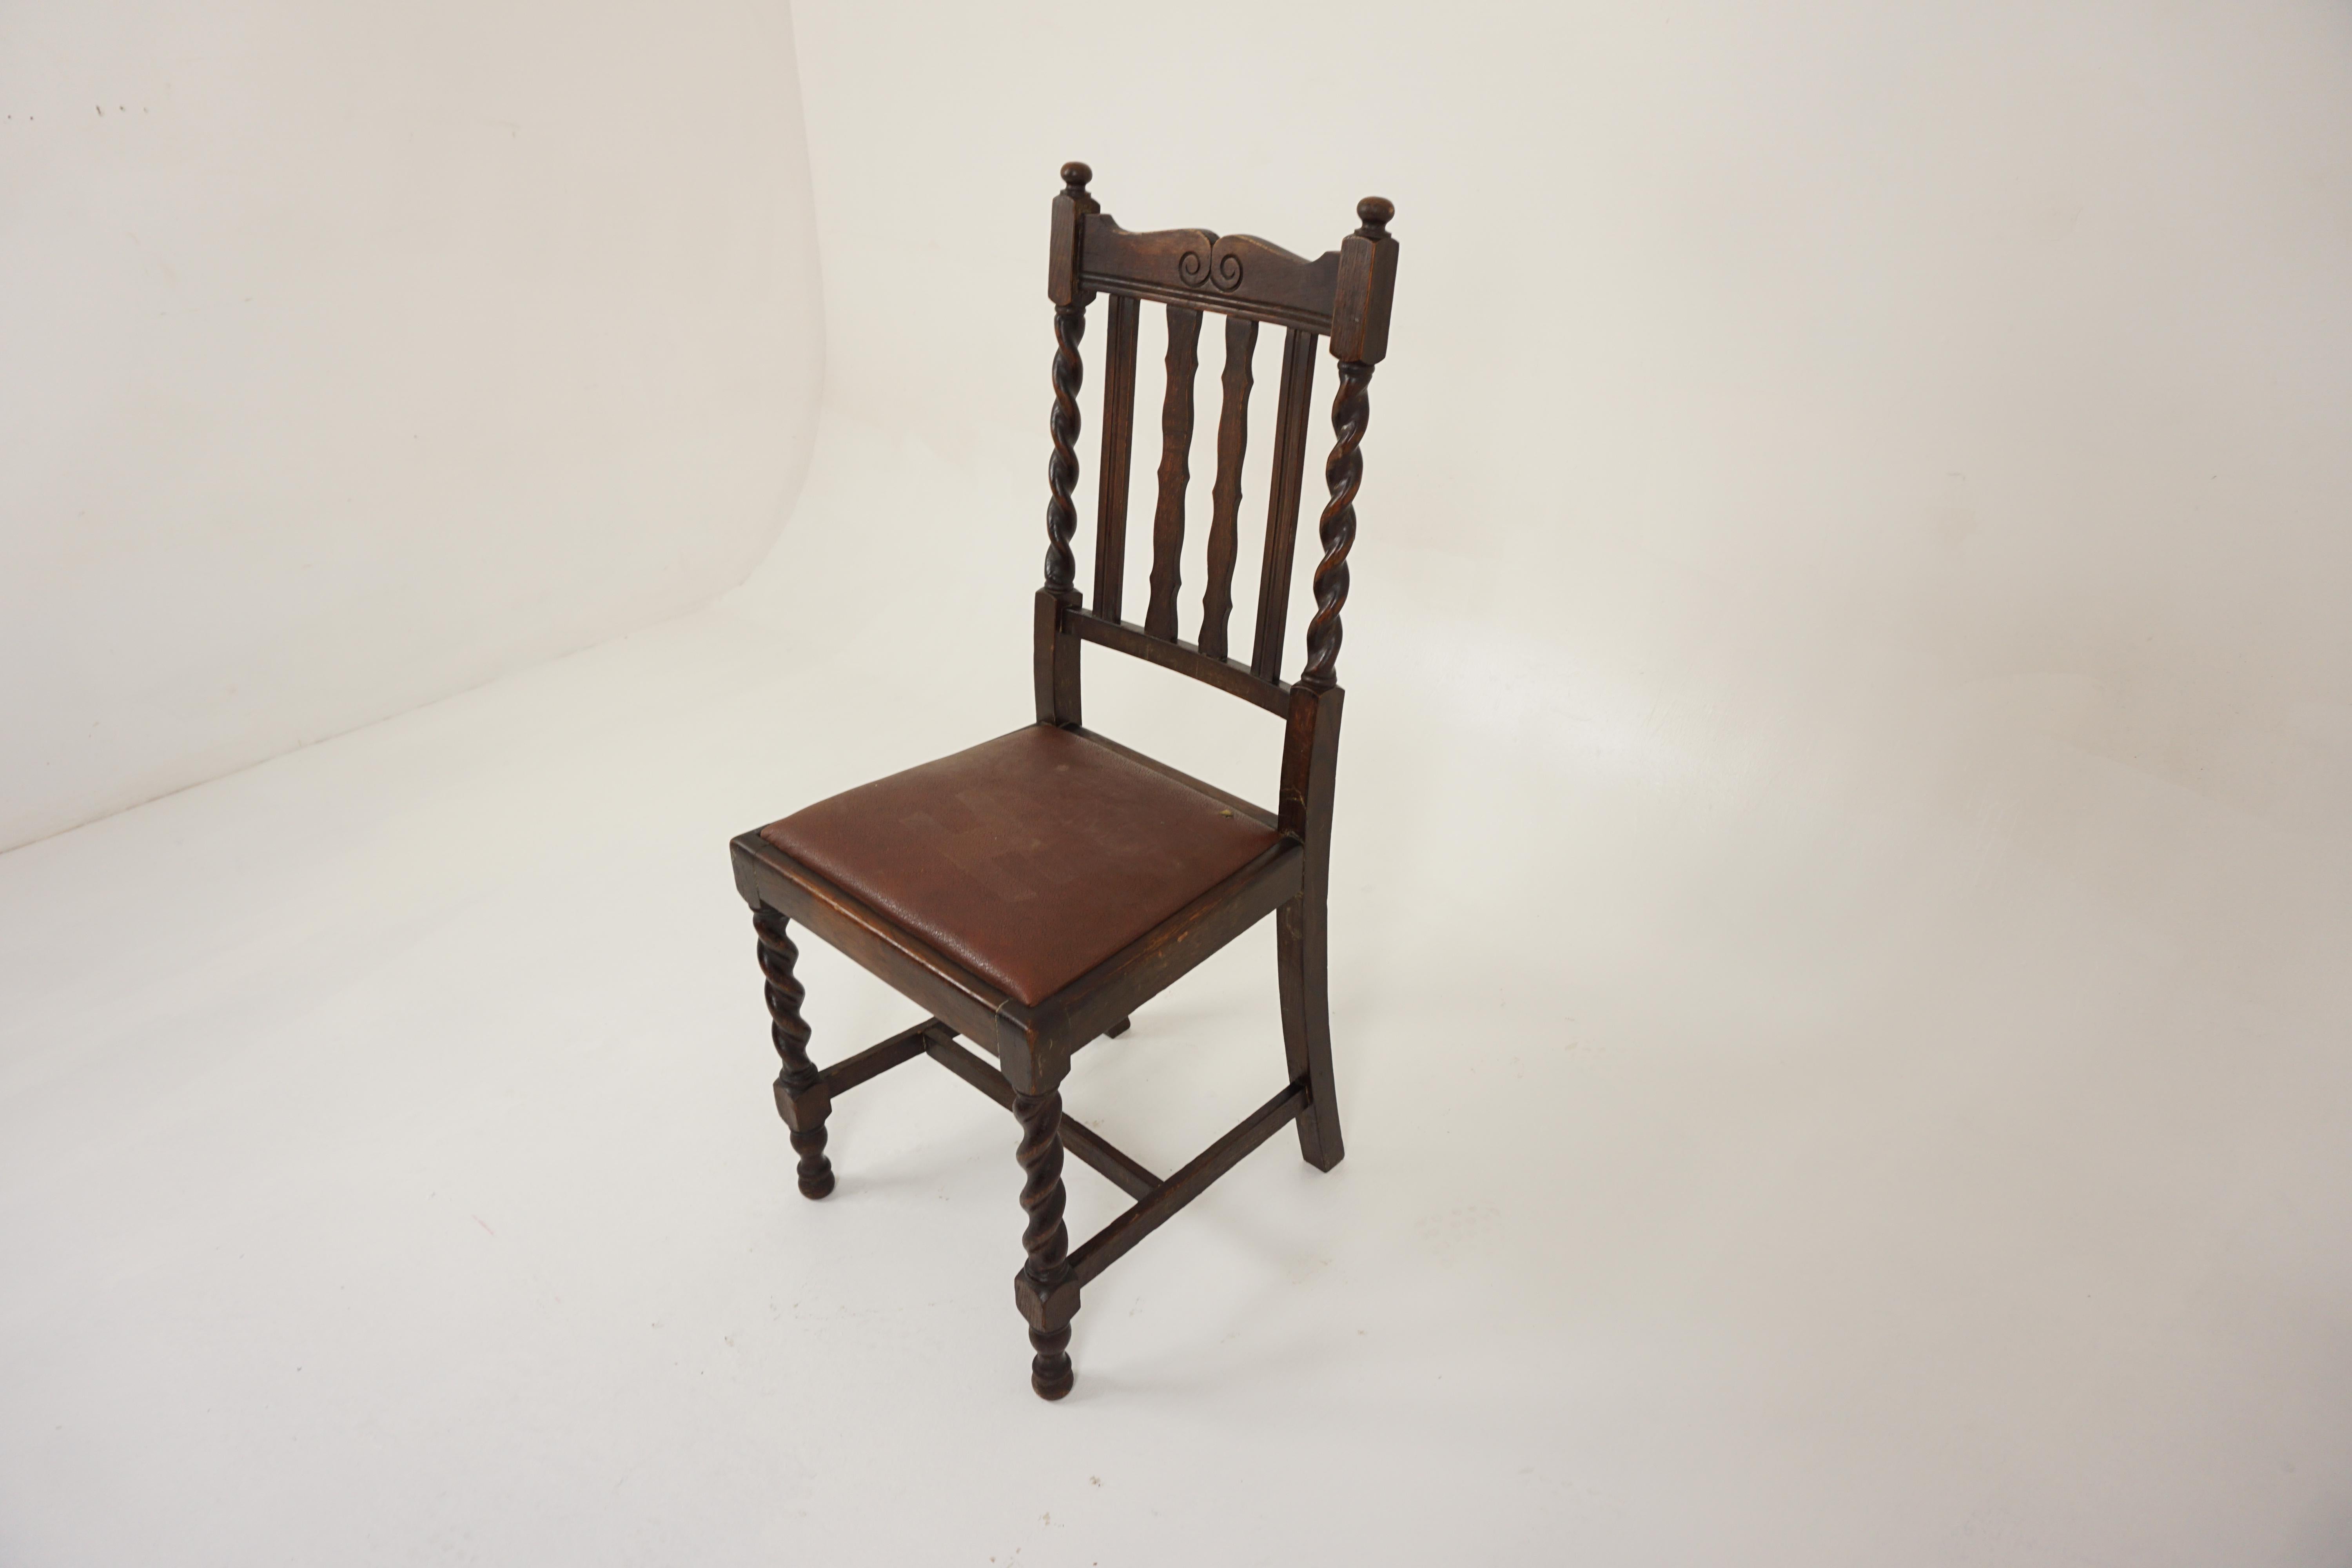 Single carved oak barley twist dining chair, Scotland 1920, H007

Scotland 1920
Solid Oak
Original finish
Carved top rail
Pair of Barley twist support with finials on top
Four vertical slats to the back
Lift out upholstered seat
All